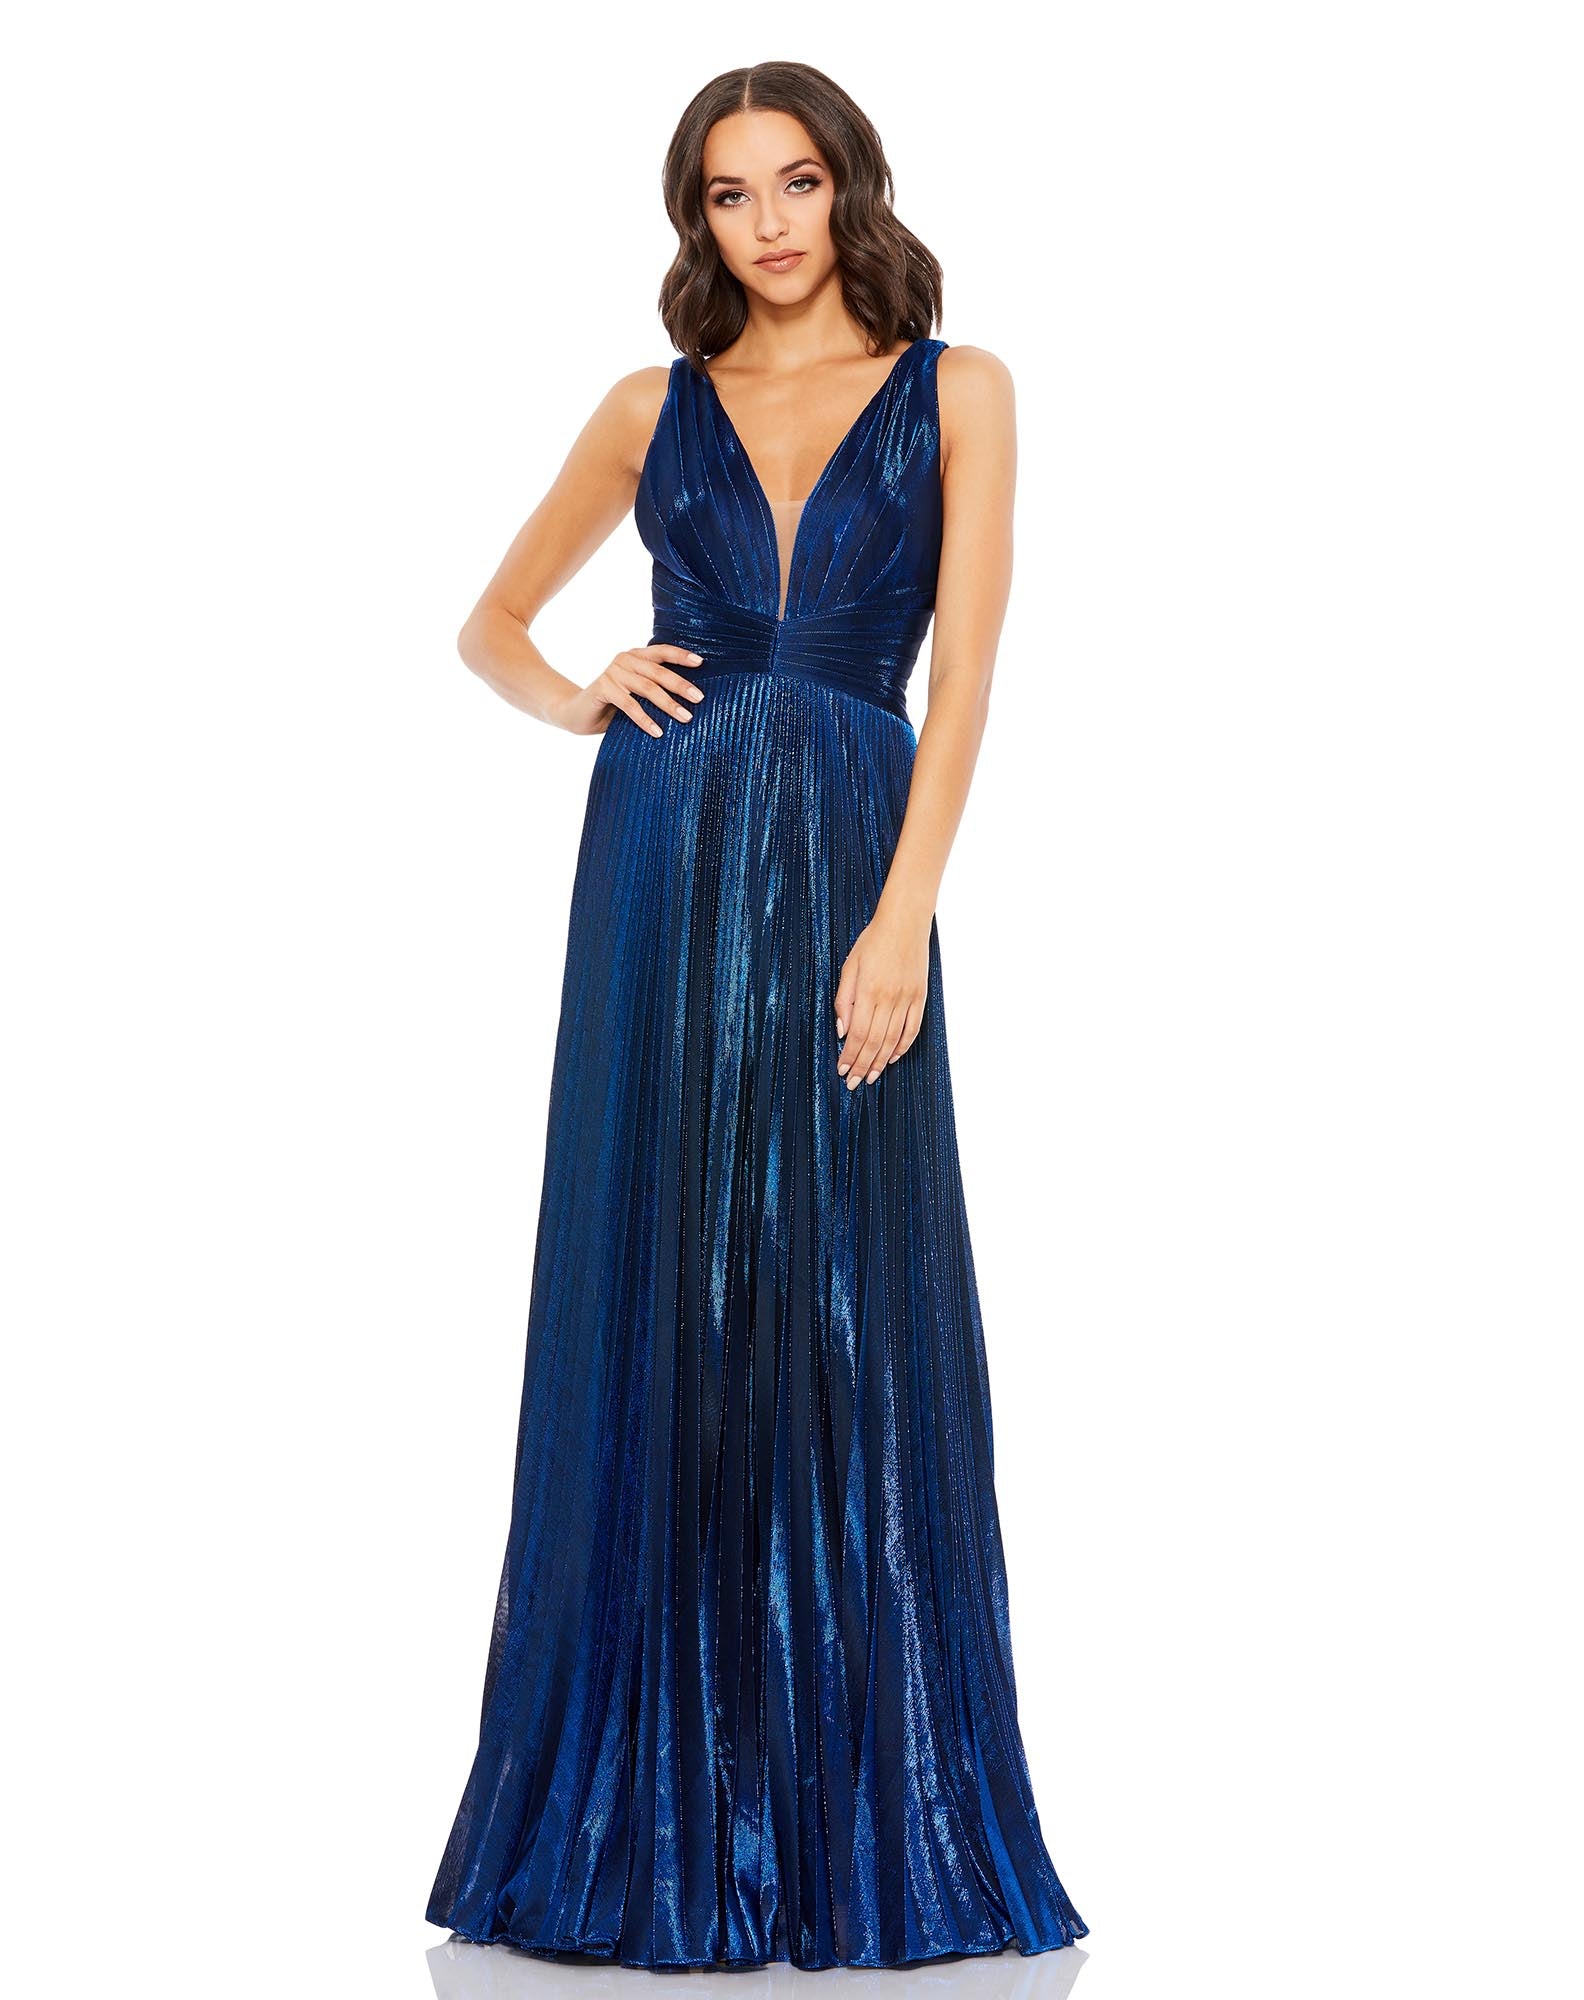 Plunge Neck Pleated Metallic Gown